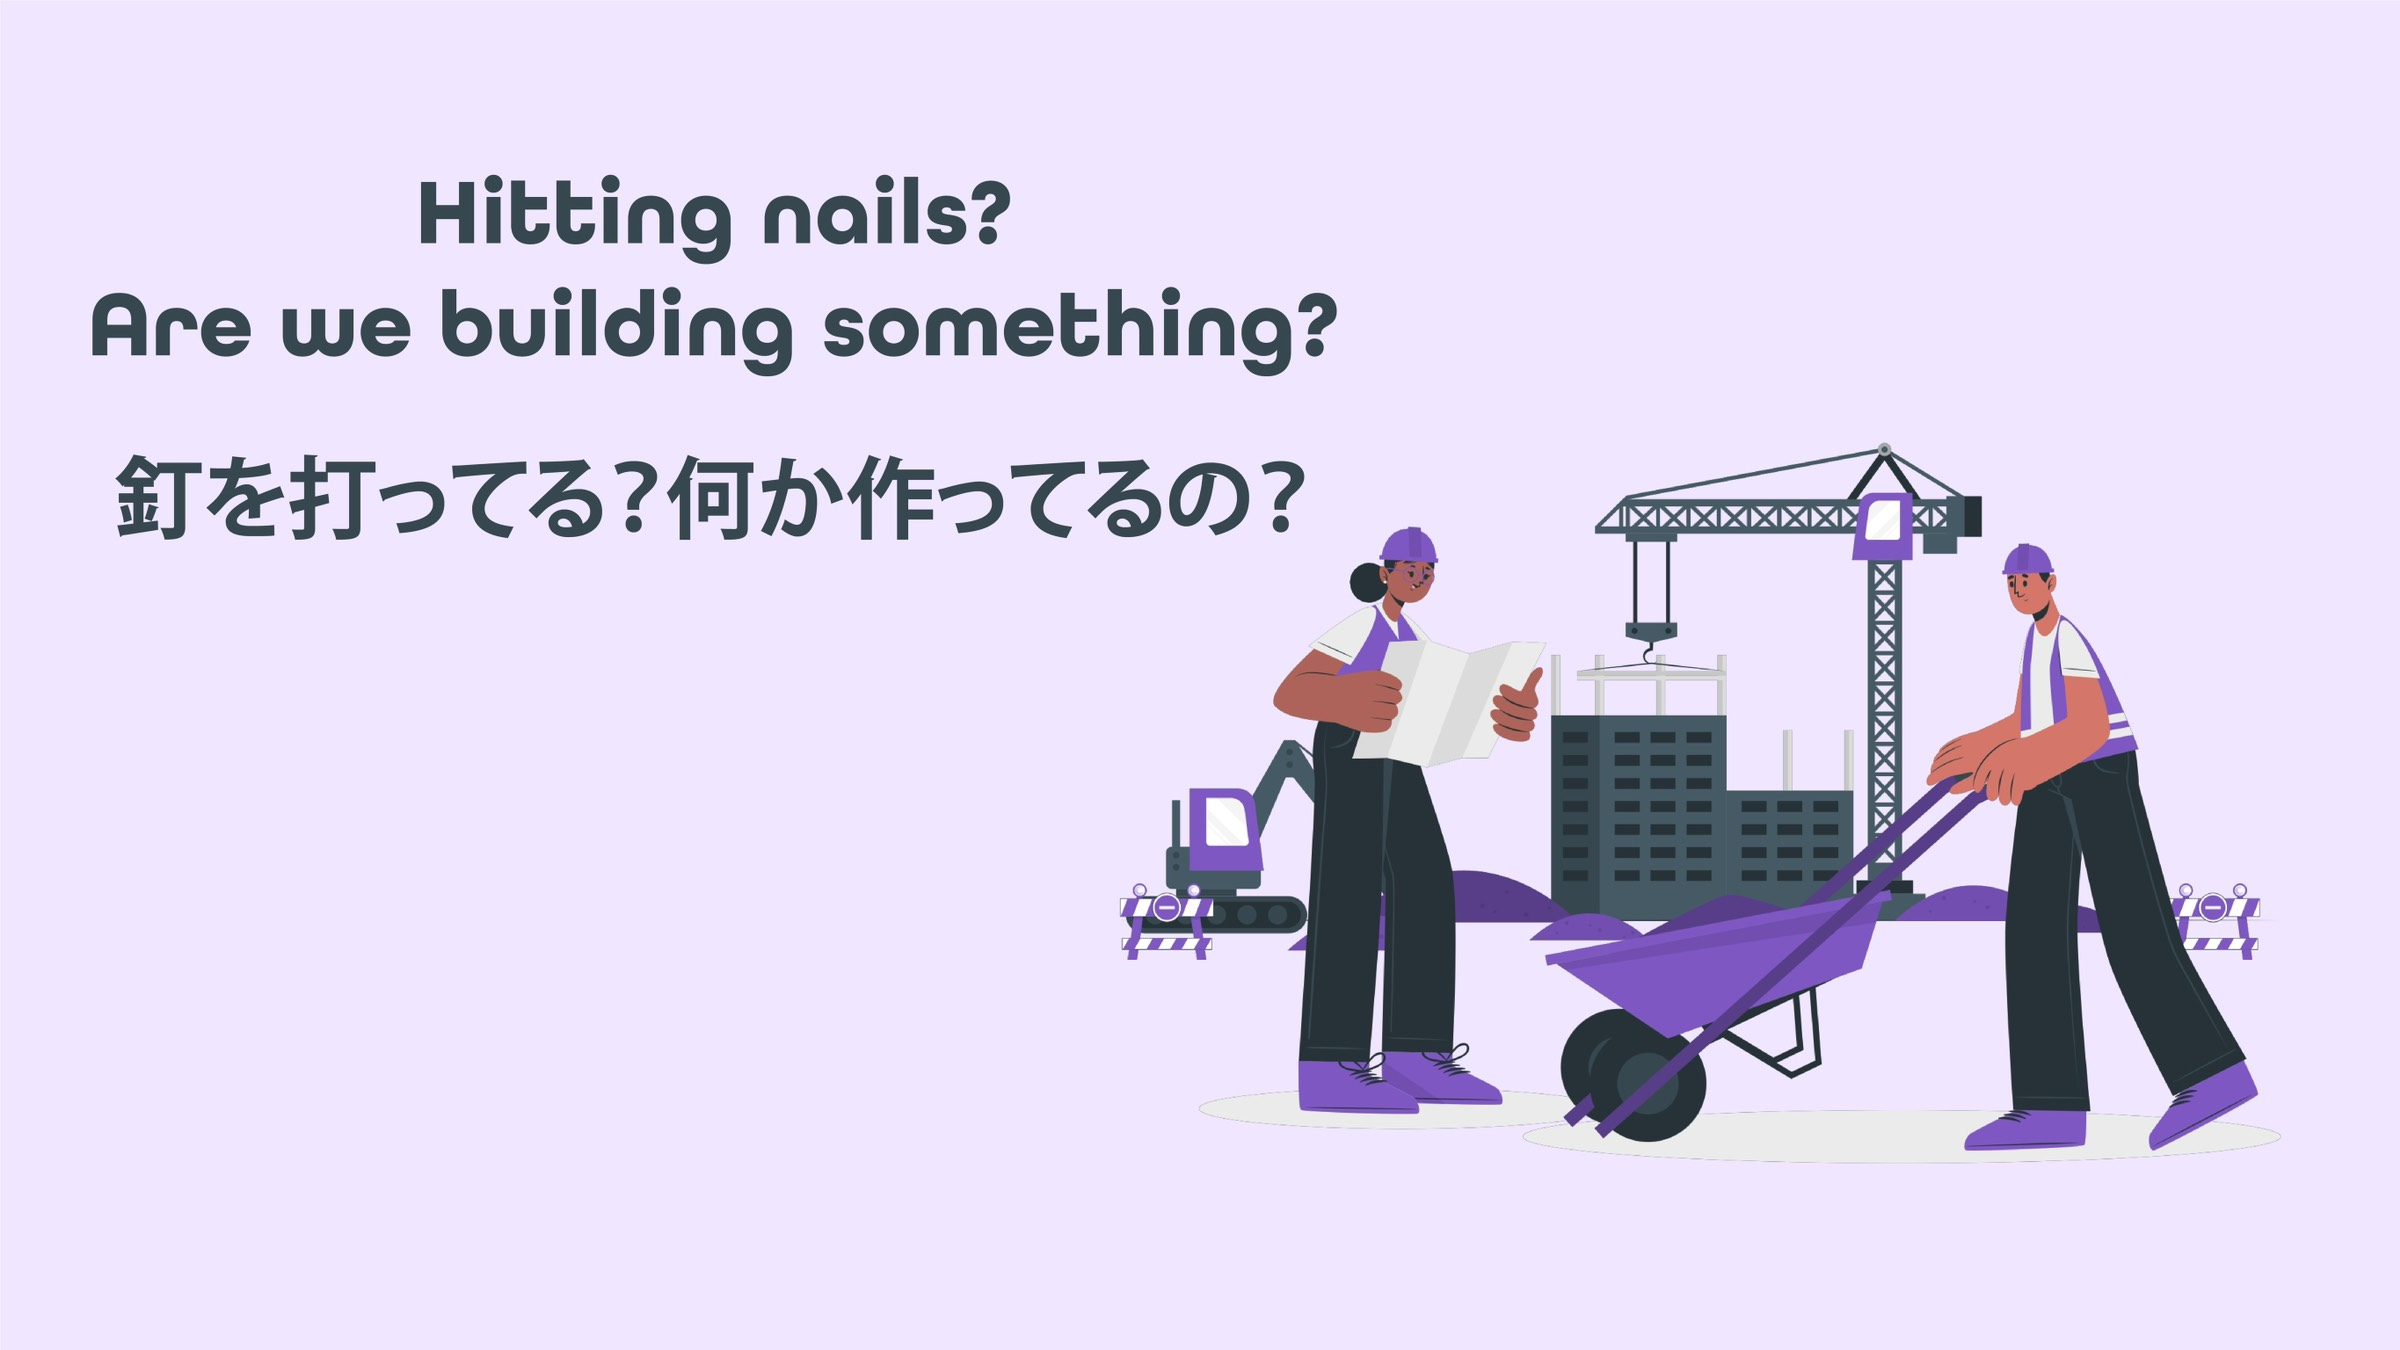 Featured image for “Hitting nails? Are we building something? 釘を打ってる？何か作ってるの？”